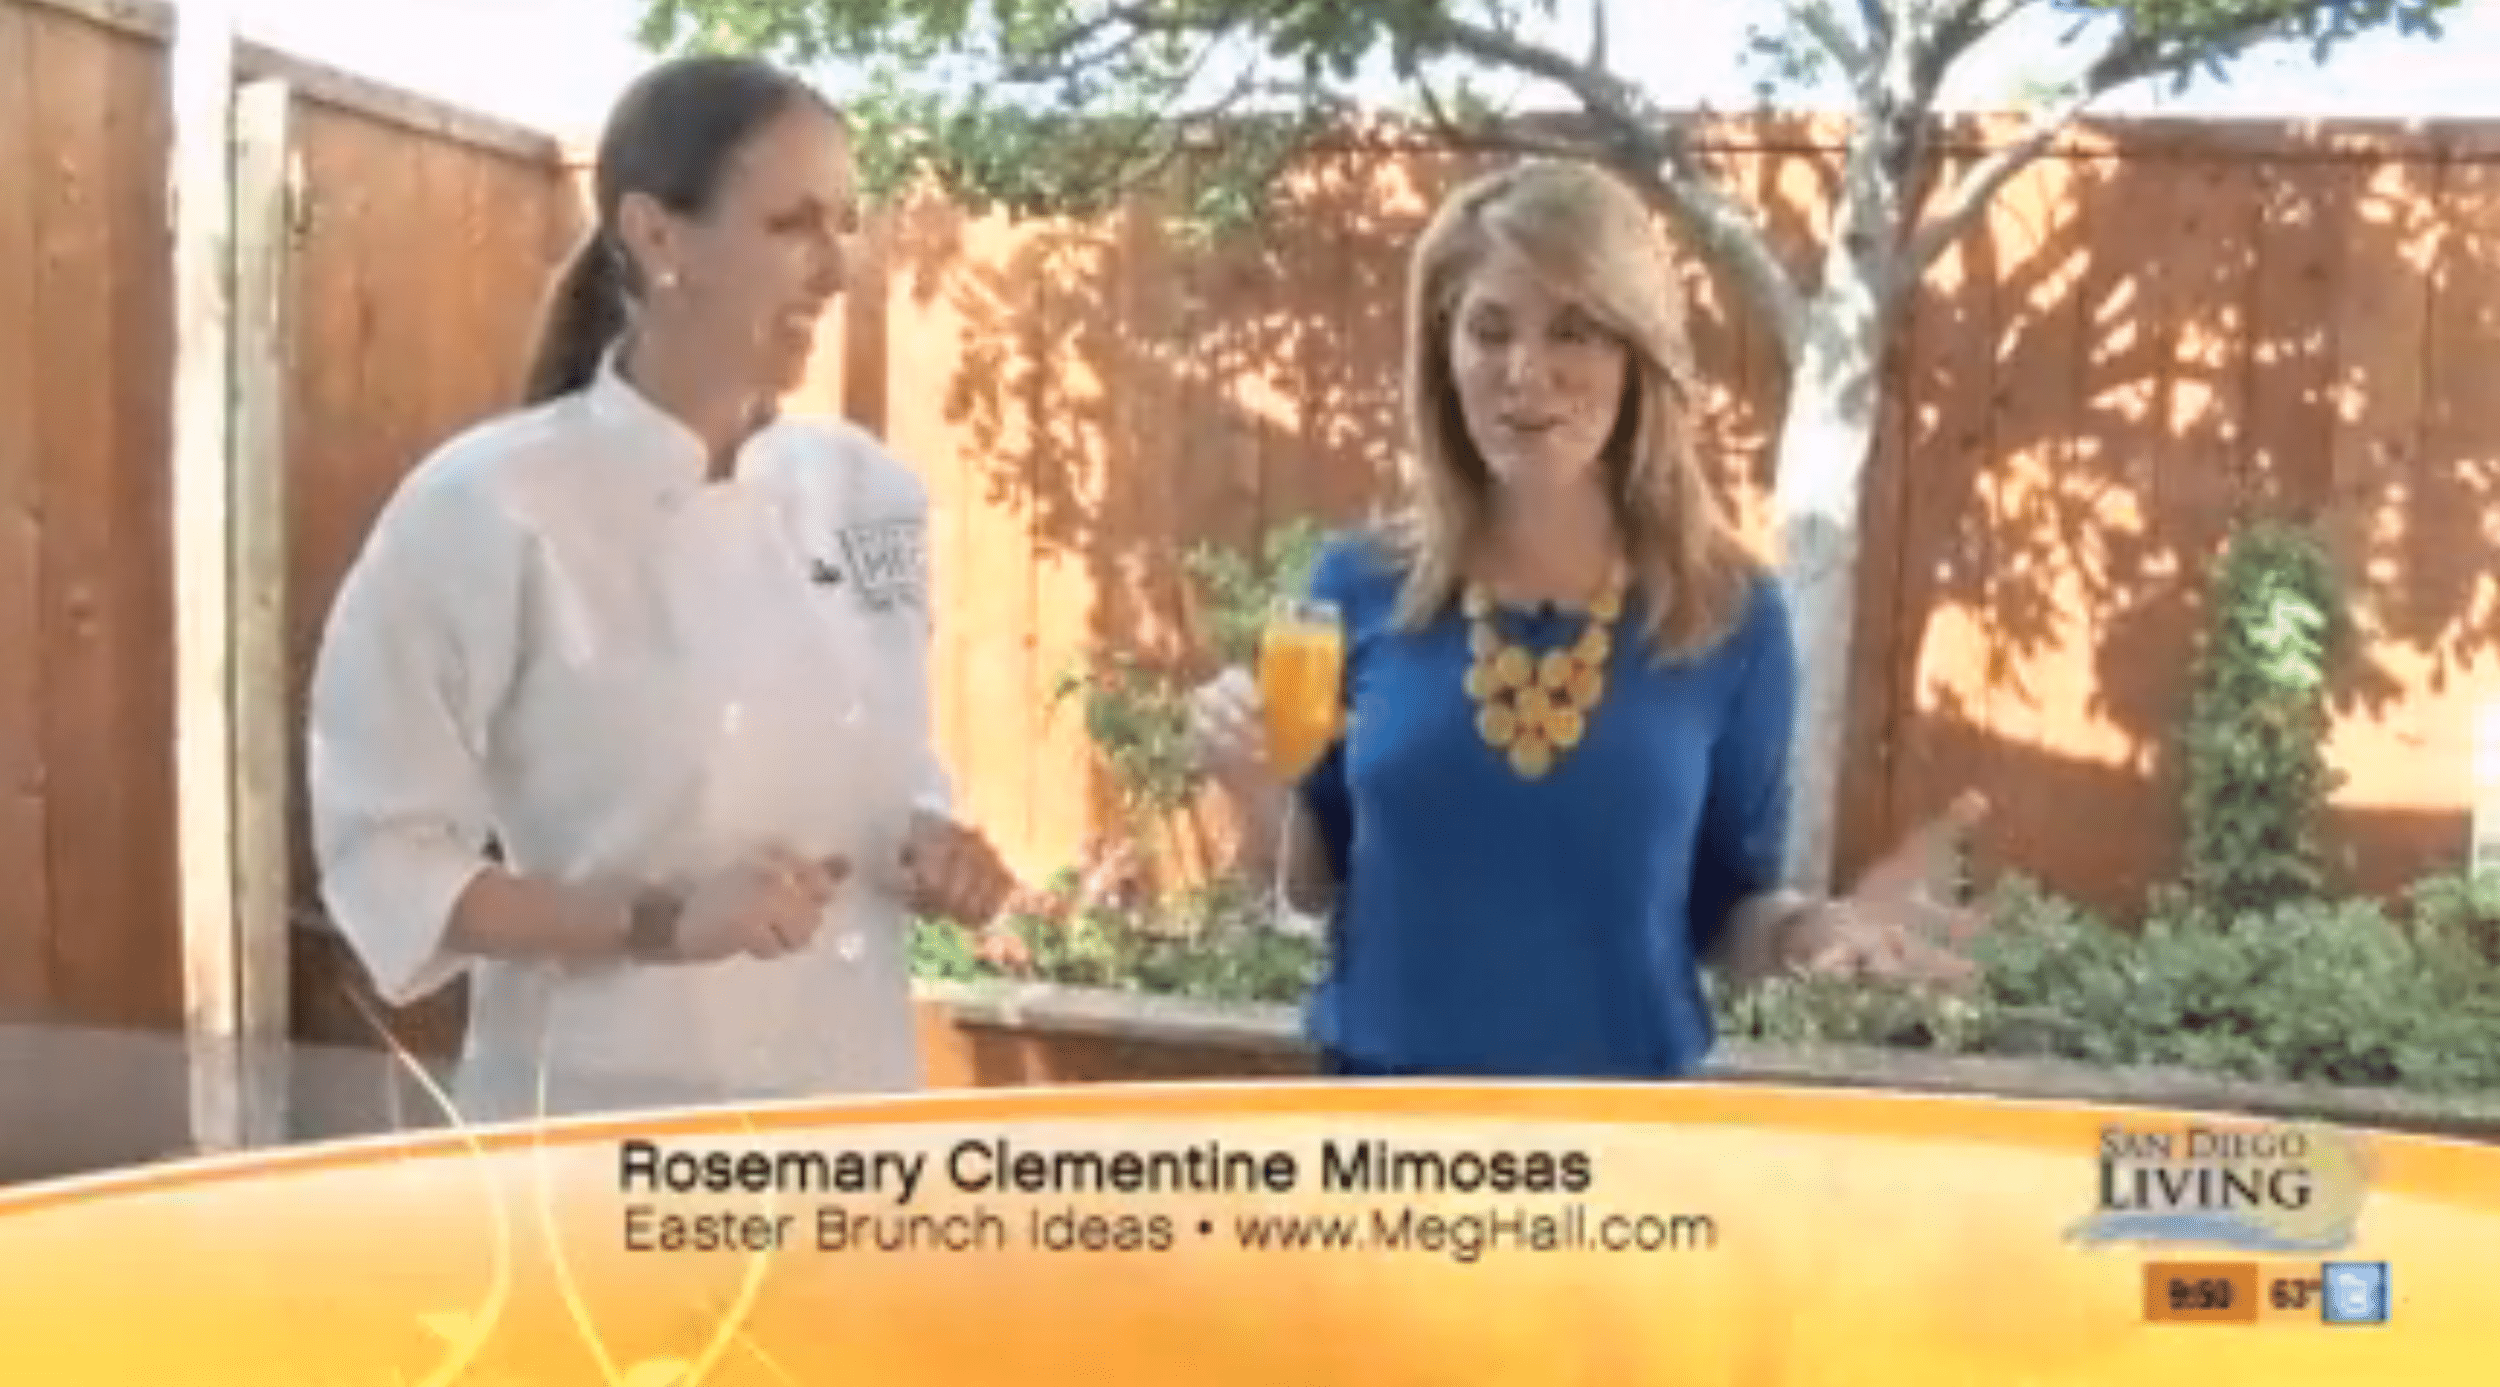 San Diego Living Episode with Chef Meg Hall